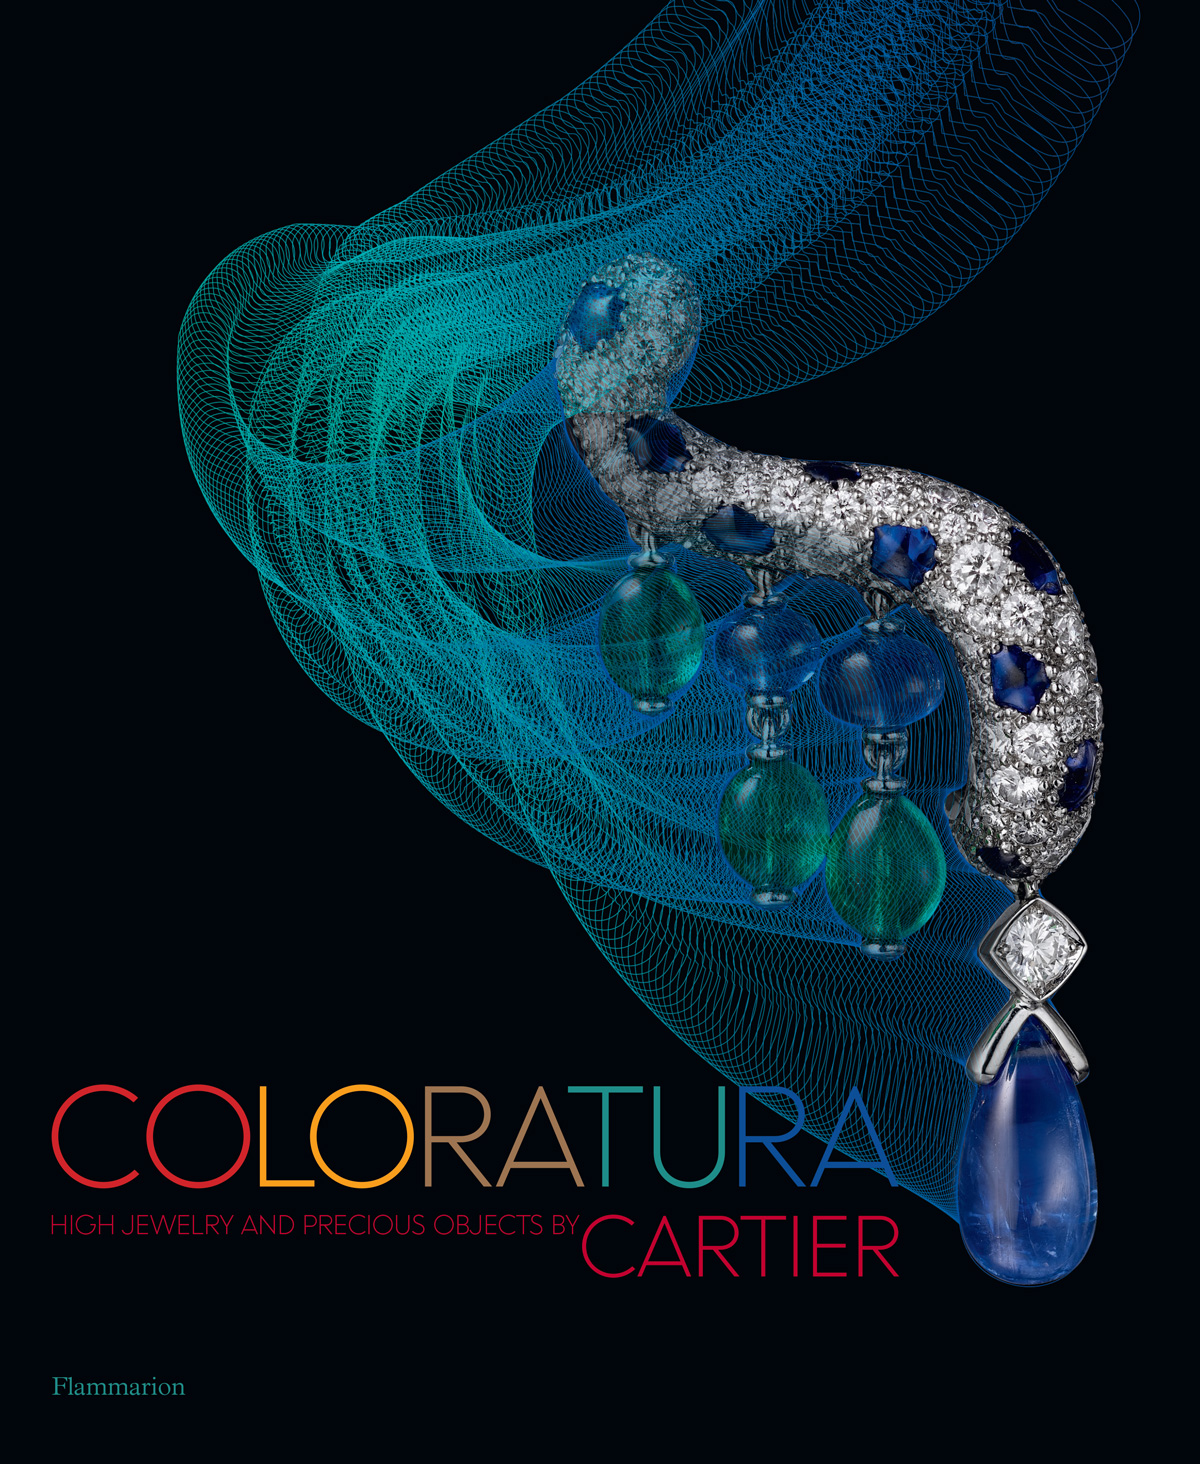 Coloratura-High-Jewelry-and-Precious-Objects-by-Cartier